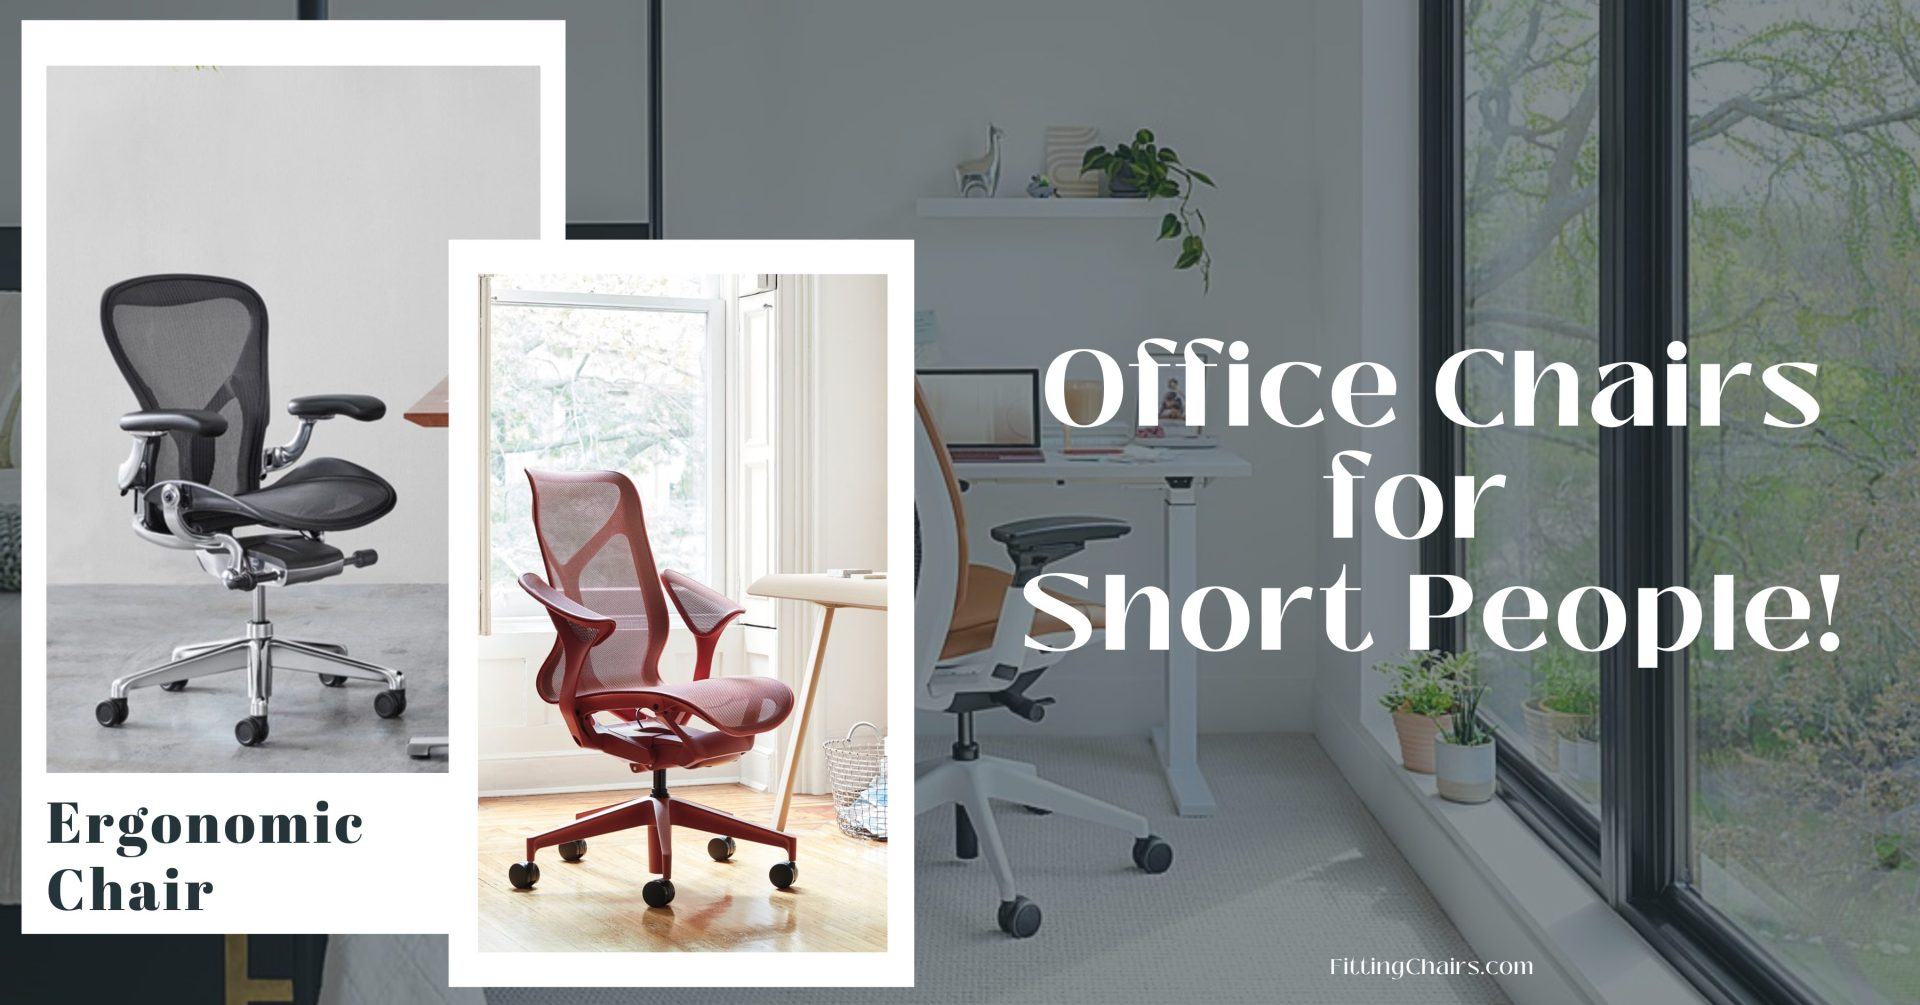 Office Chairs for Short People!